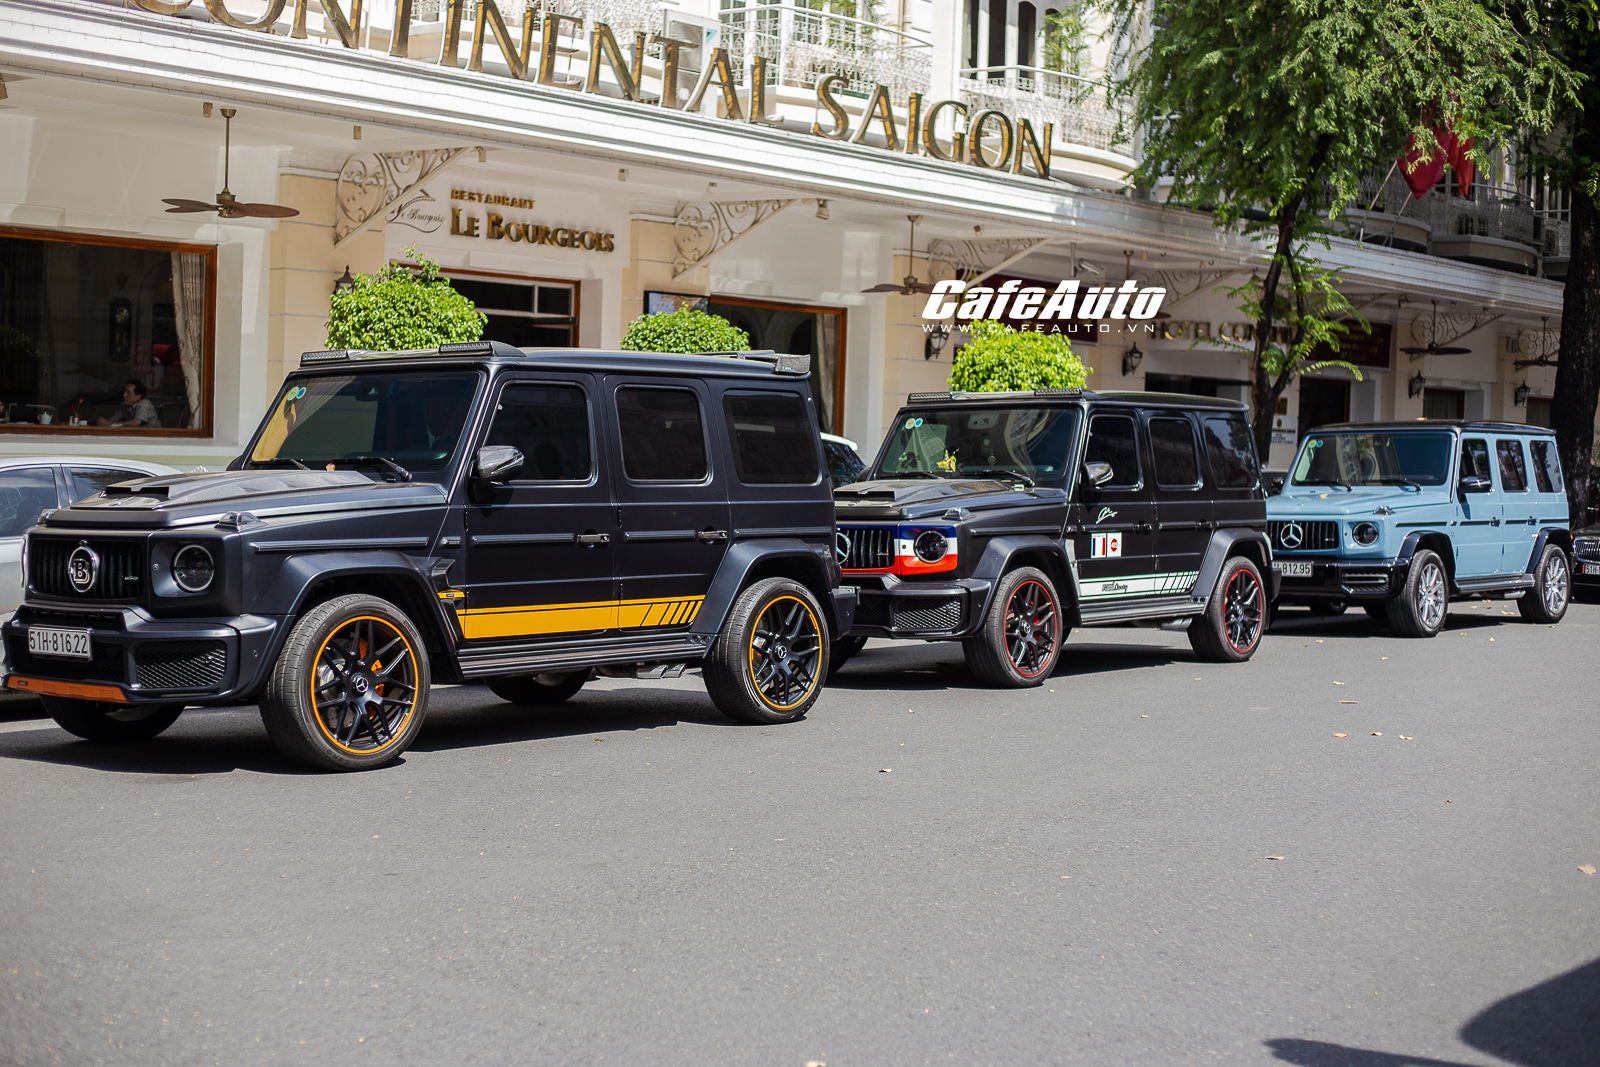 mercedes-amg-g-63-phan-phoi-chinh-hang-cafeautovn-22